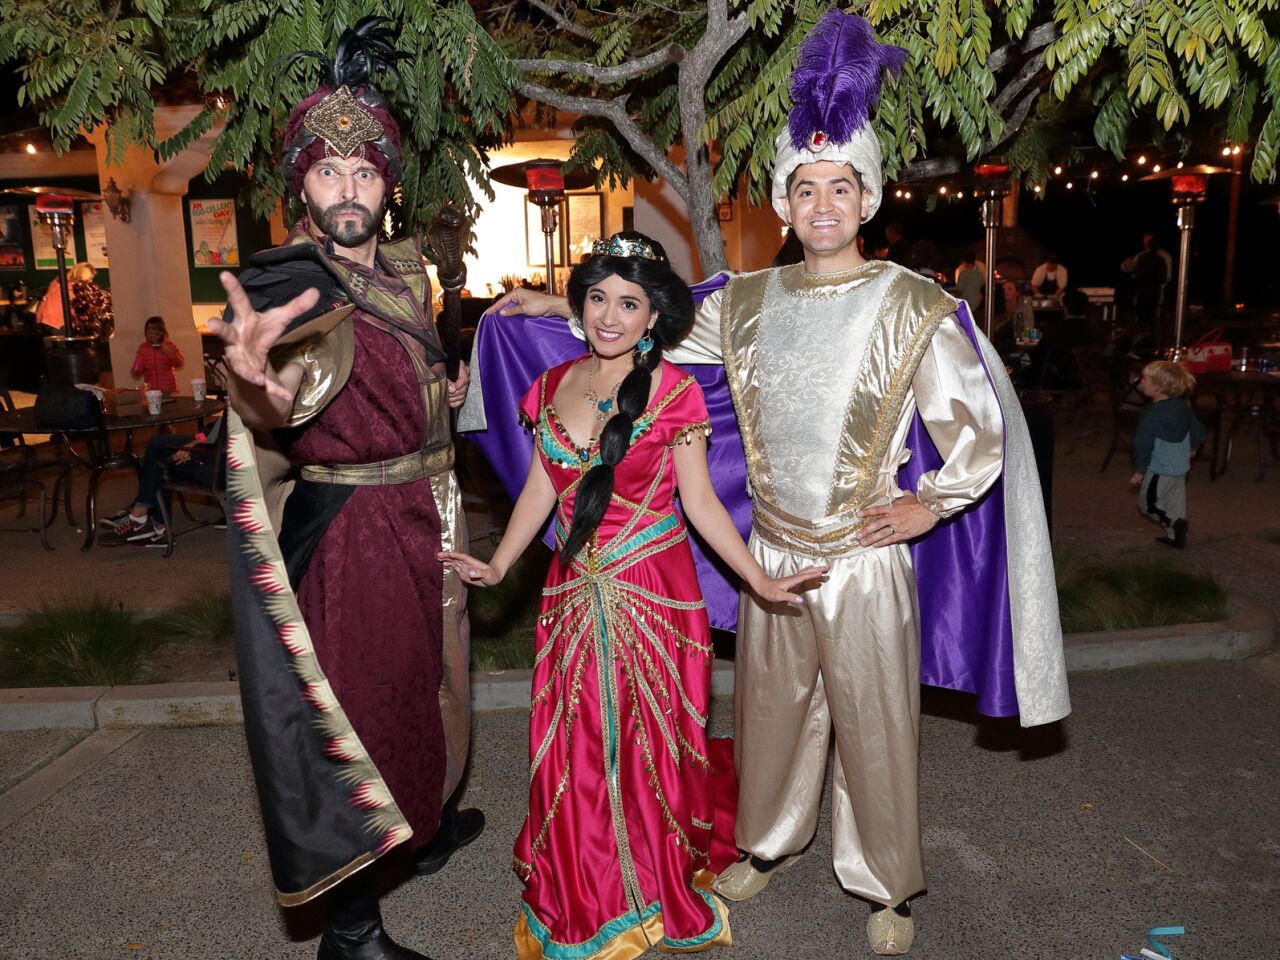 Characters were on hand to pose with the children: Jafar, Jasmine, and Aladdin